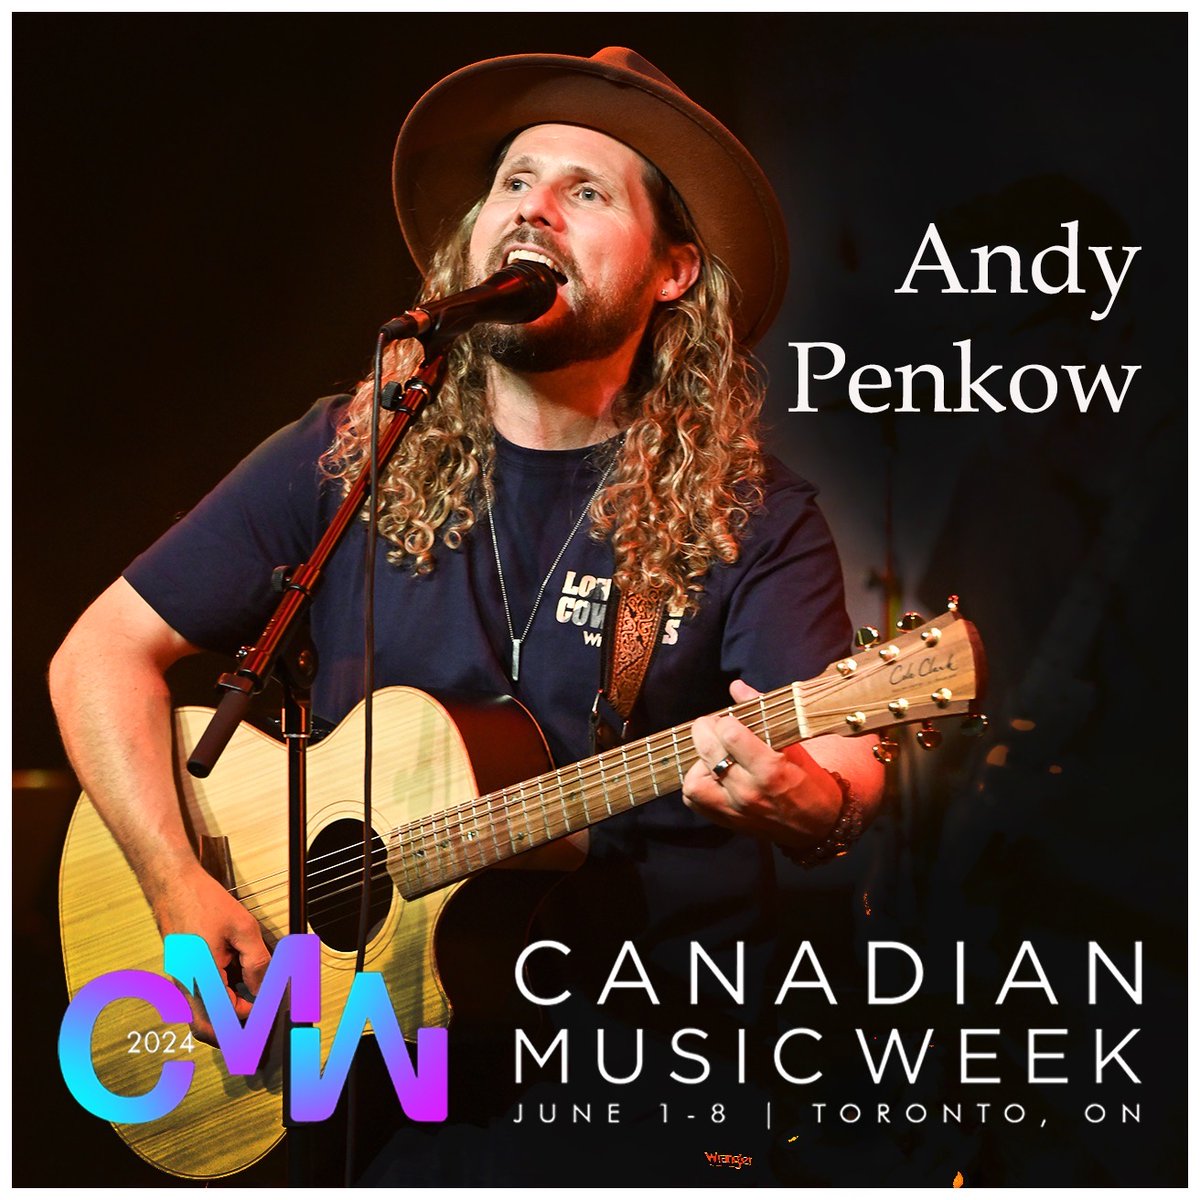 🎵 Excited to announce that I'll be performing at @canadanmusicweek (CMW), one of Canada’s largest and longest running new music festivals! It's an honor to be a part of this. 🎶 #CMW2024 #CanadianMusicWeek #MusicFestival 🇨🇦